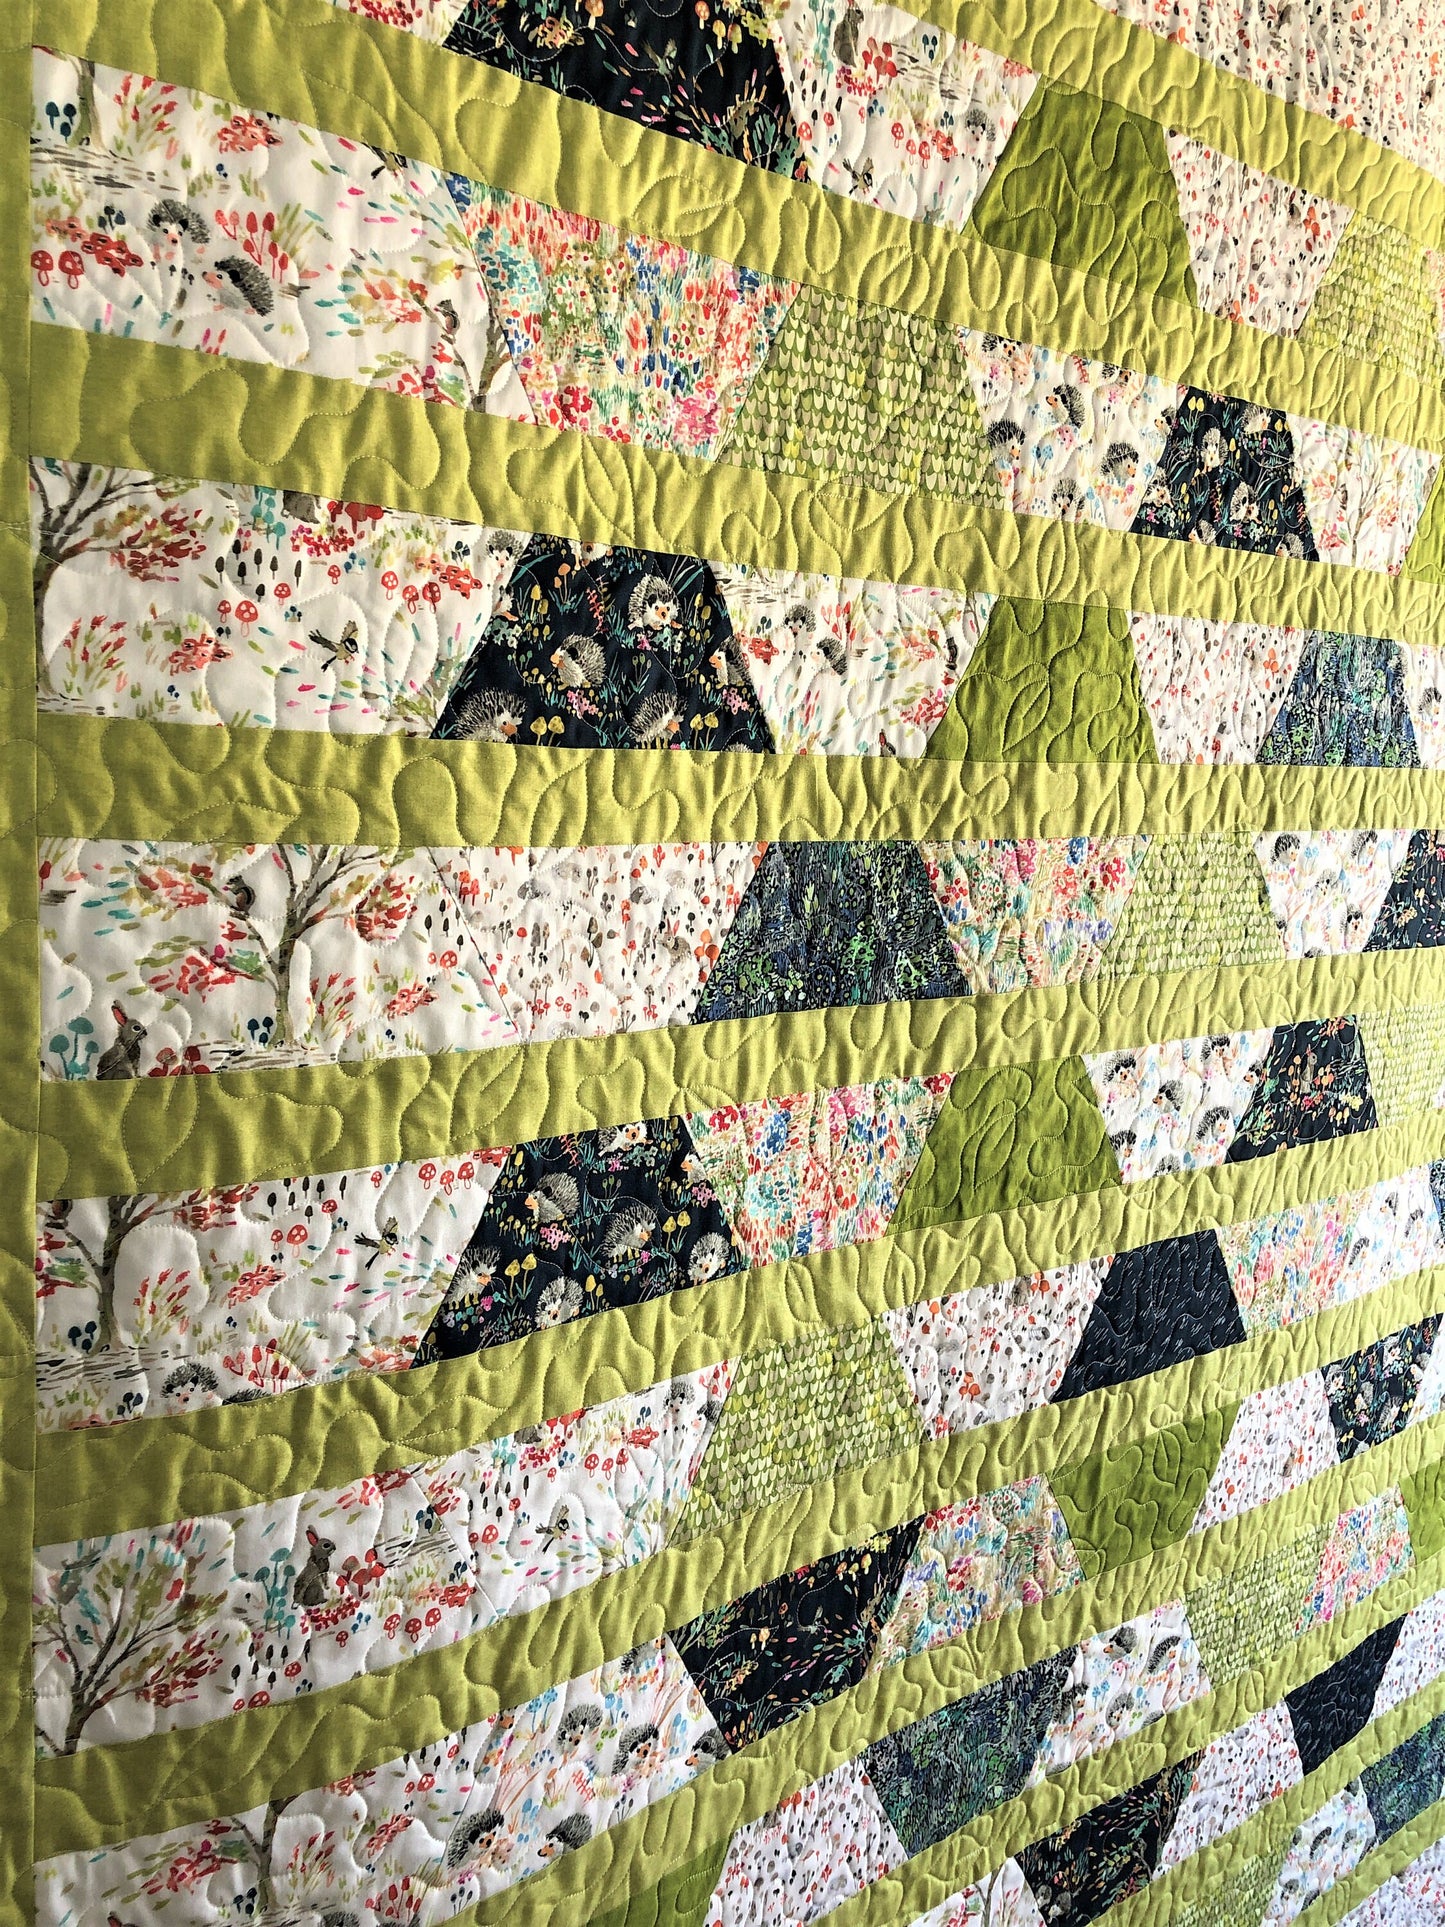 Garden Quilt, With Hedgehog, Rabbit, and Mushroom, Green and White, Bordered Half Hexagons, Twin Size